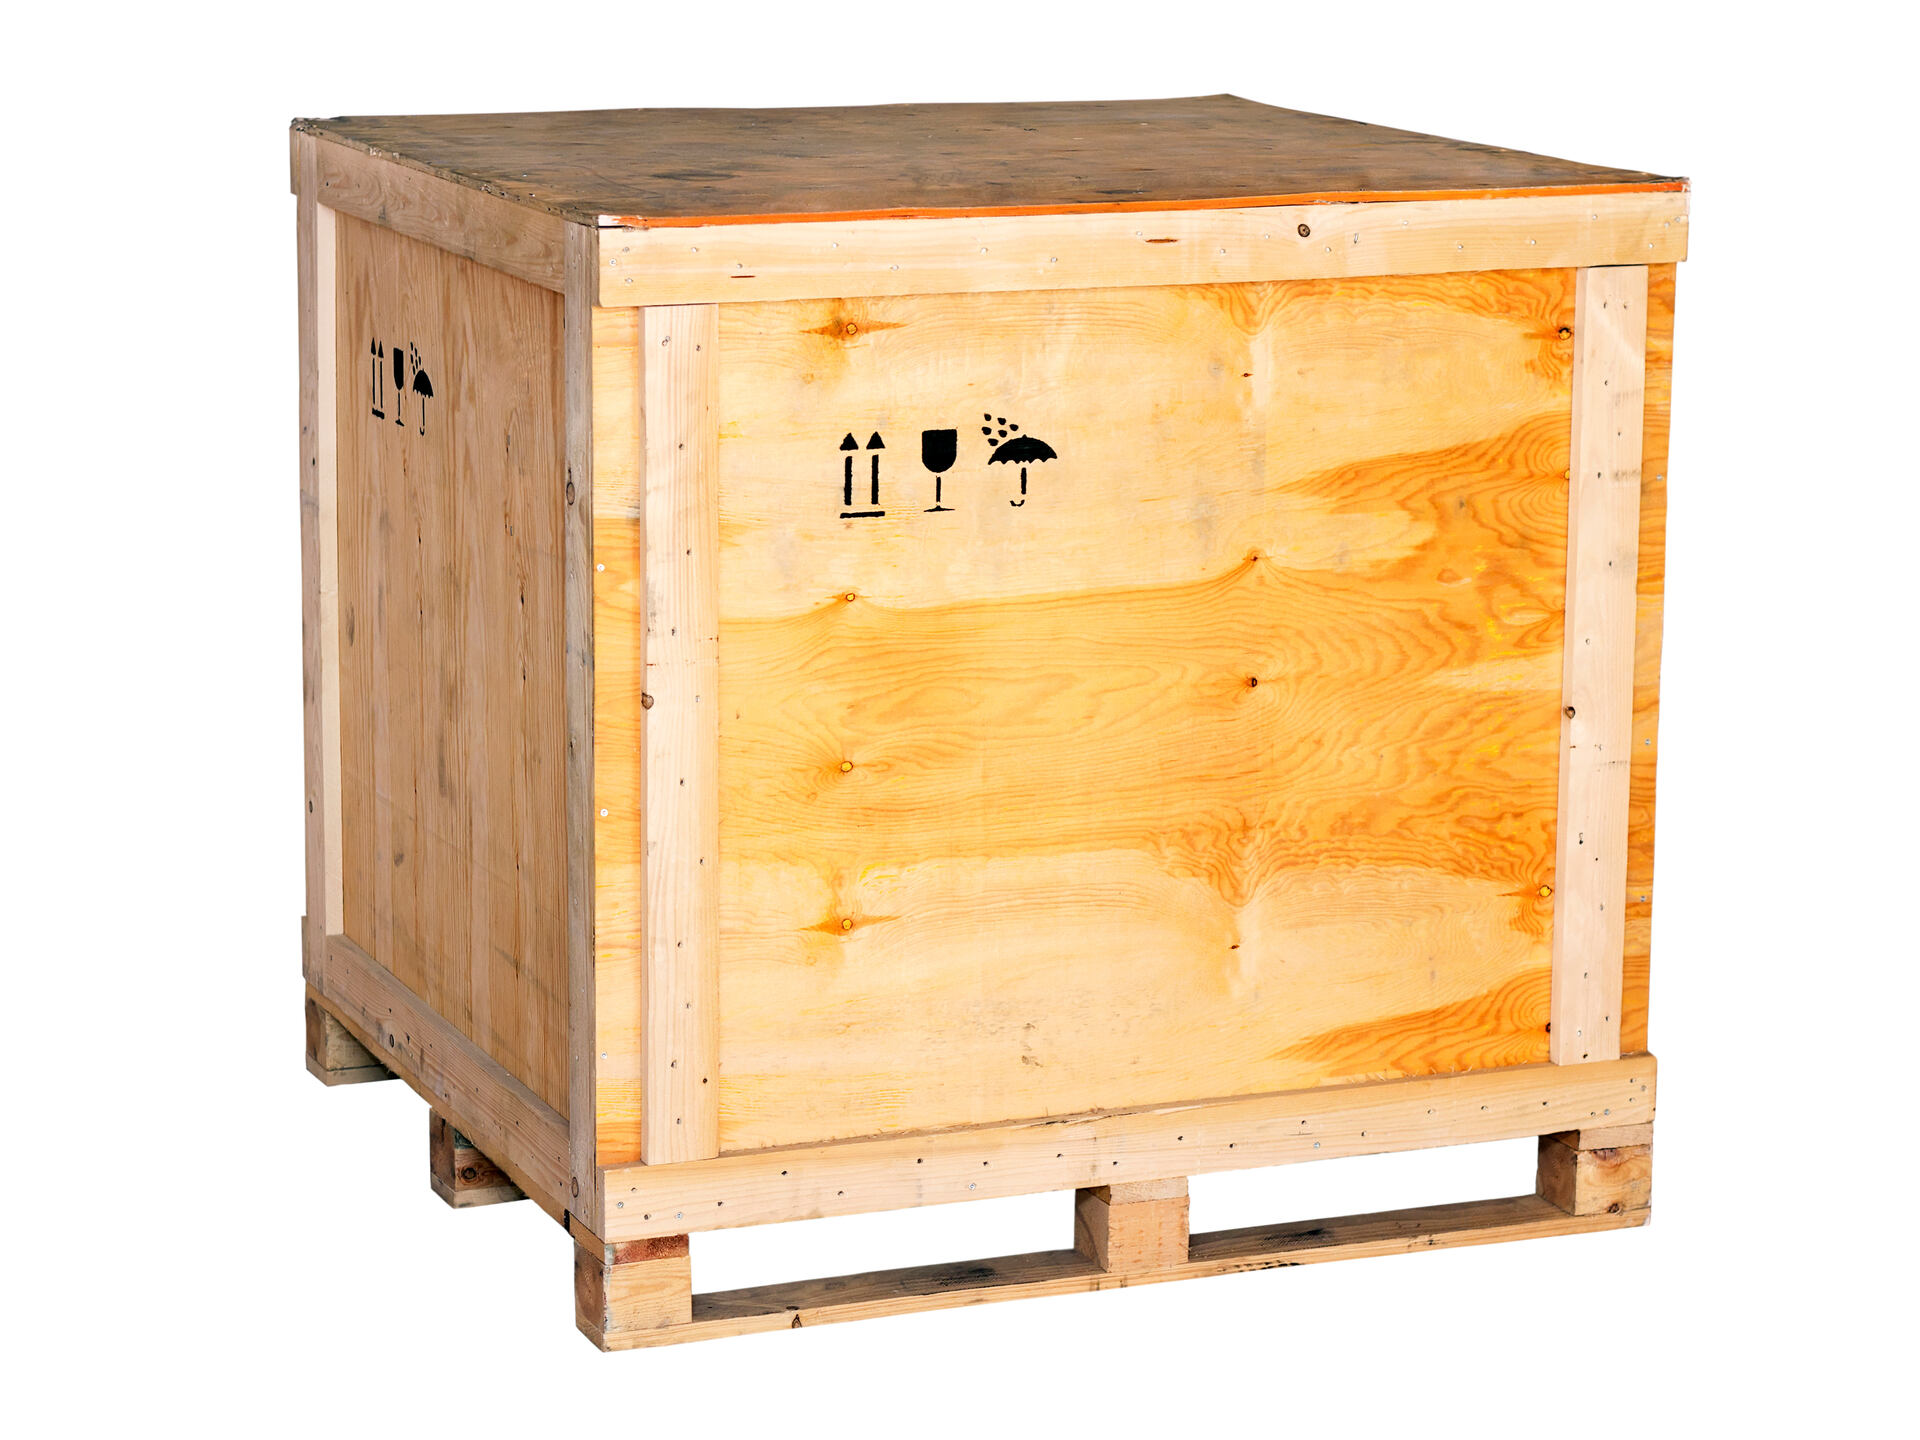 A large wooden crate